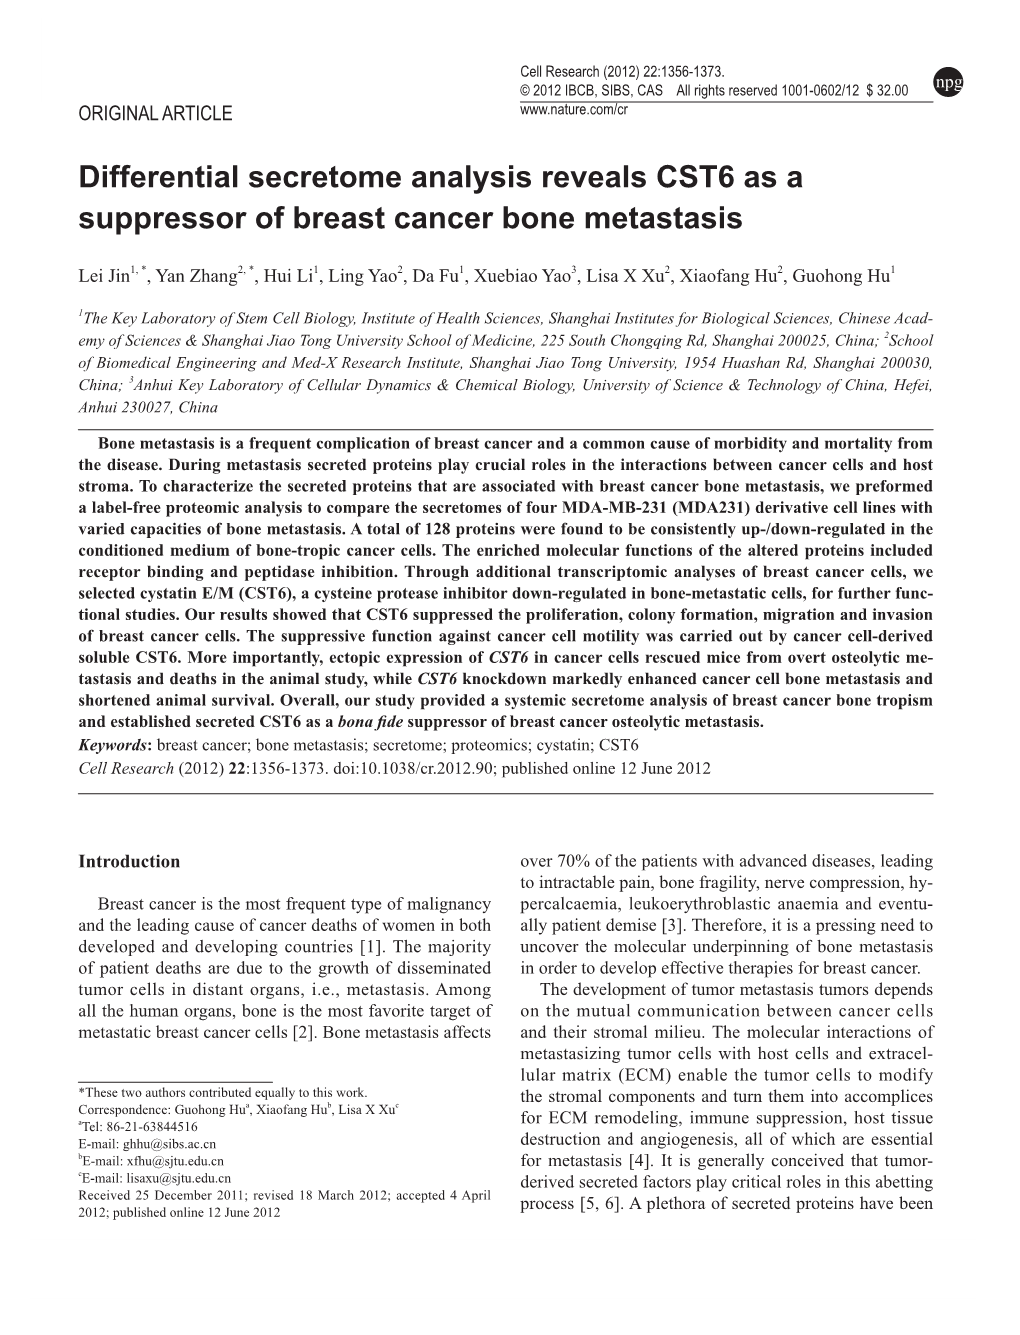 Differential Secretome Analysis Reveals CST6 As a Suppressor of Breast Cancer Bone Metastasis